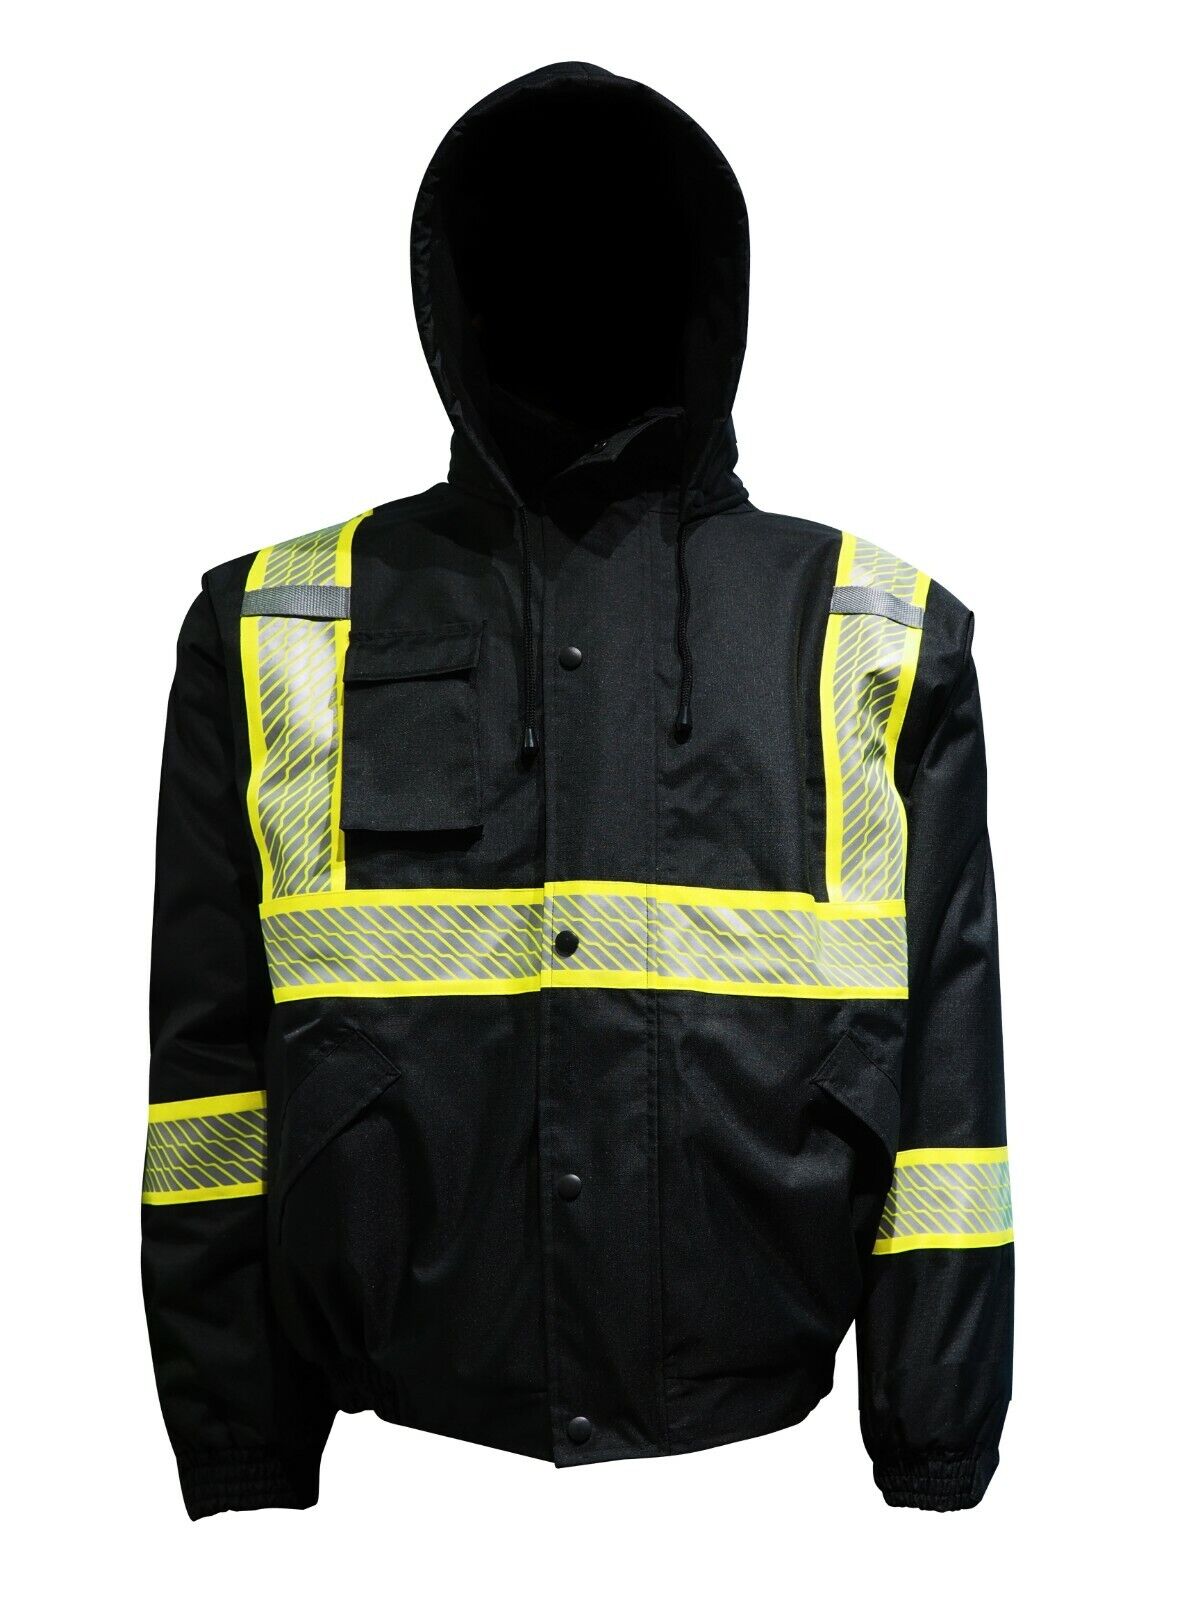 Hi-Vis Insulated Safety Bomber Reflective Class 3 Winter Jacket Warm Lined Coat  L&M - фотография #6